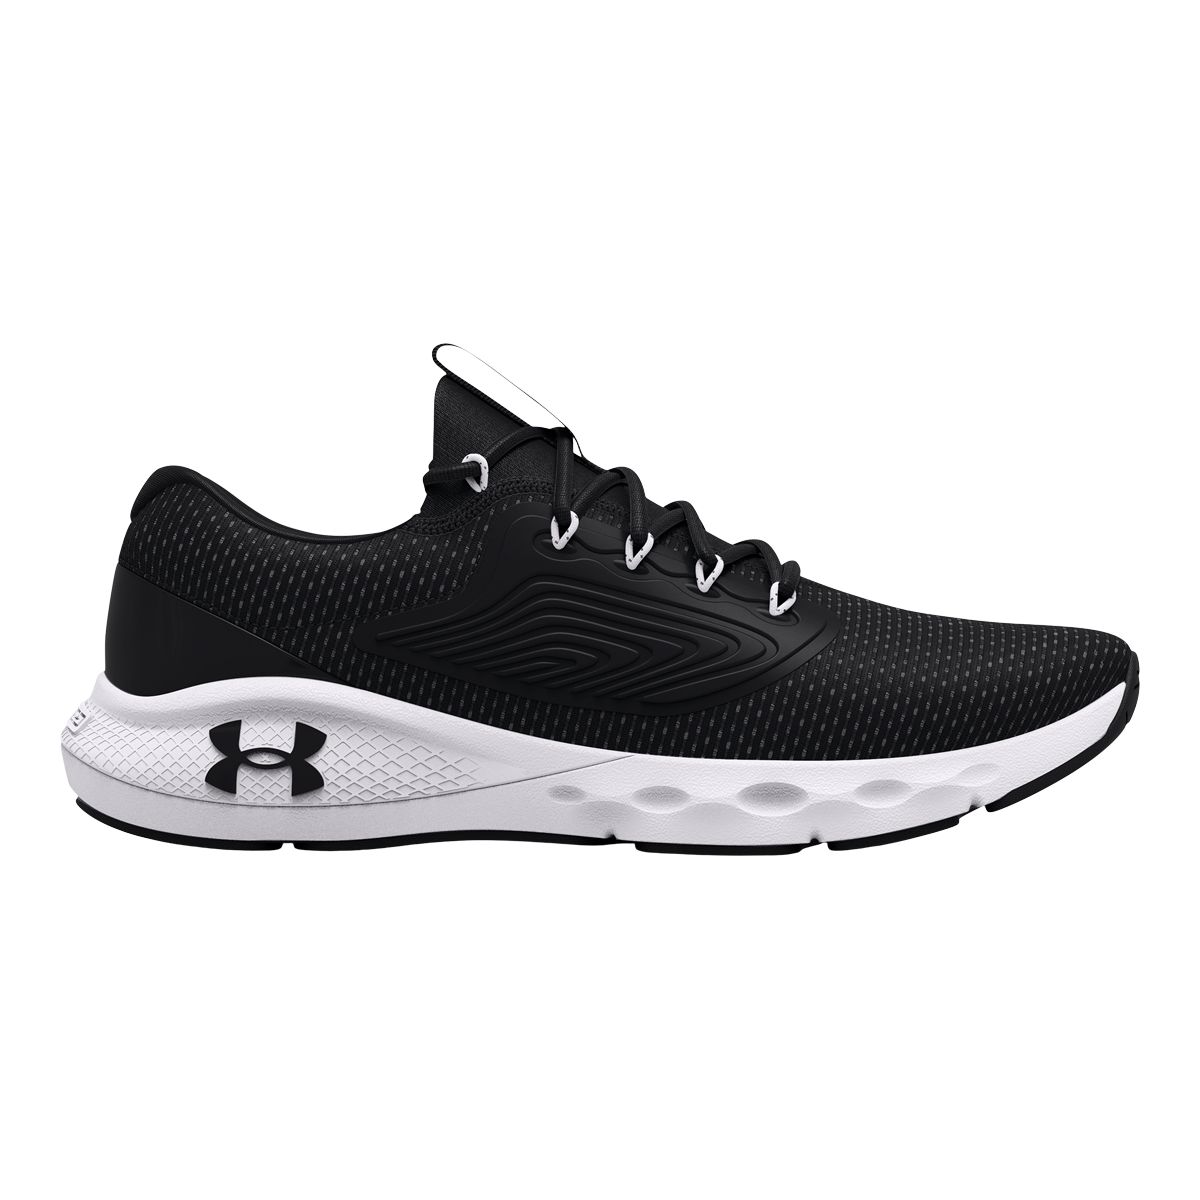 Under Armour Men's Charged Vantage 2 Running Shoes